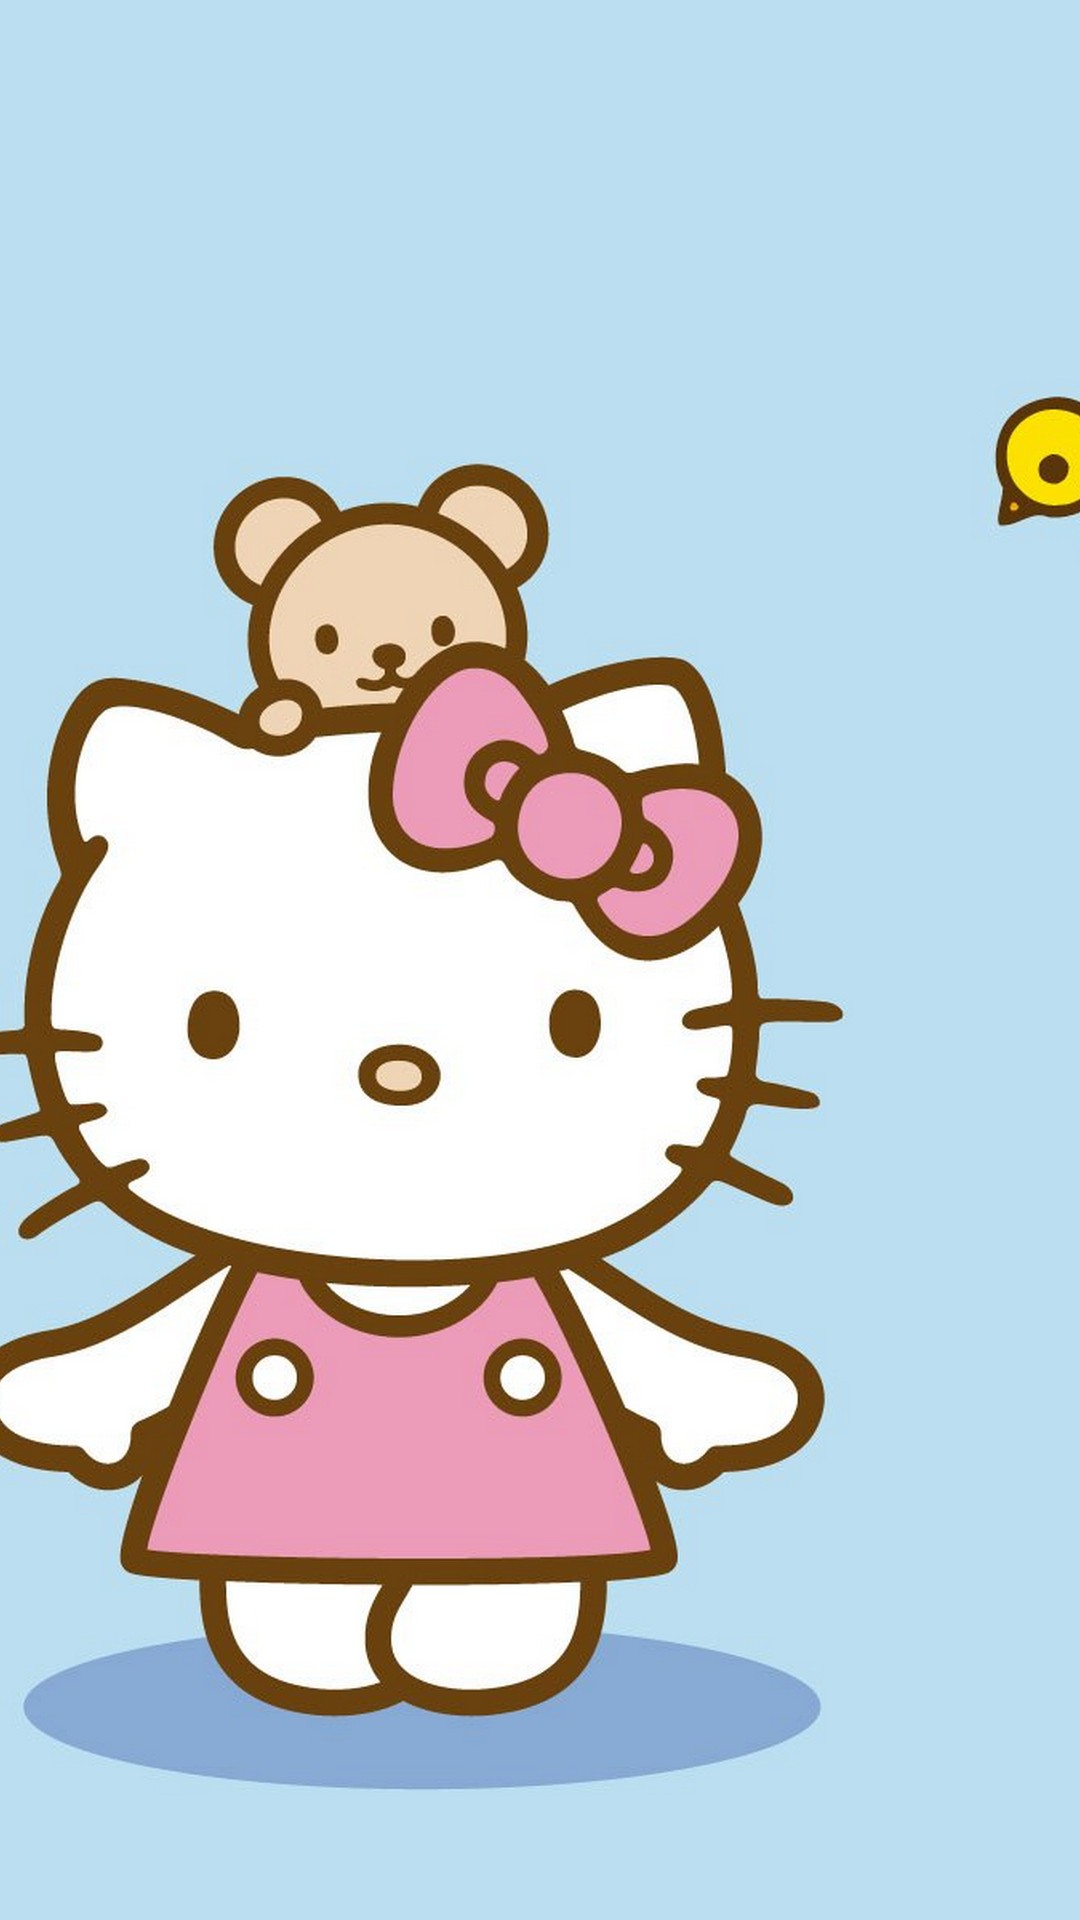 Hello Kitty Mobile Wallpaper HD with image resolution 1080x1920 pixel. You can make this wallpaper for your Desktop Computer Backgrounds, Mac Wallpapers, Android Lock screen or iPhone Screensavers